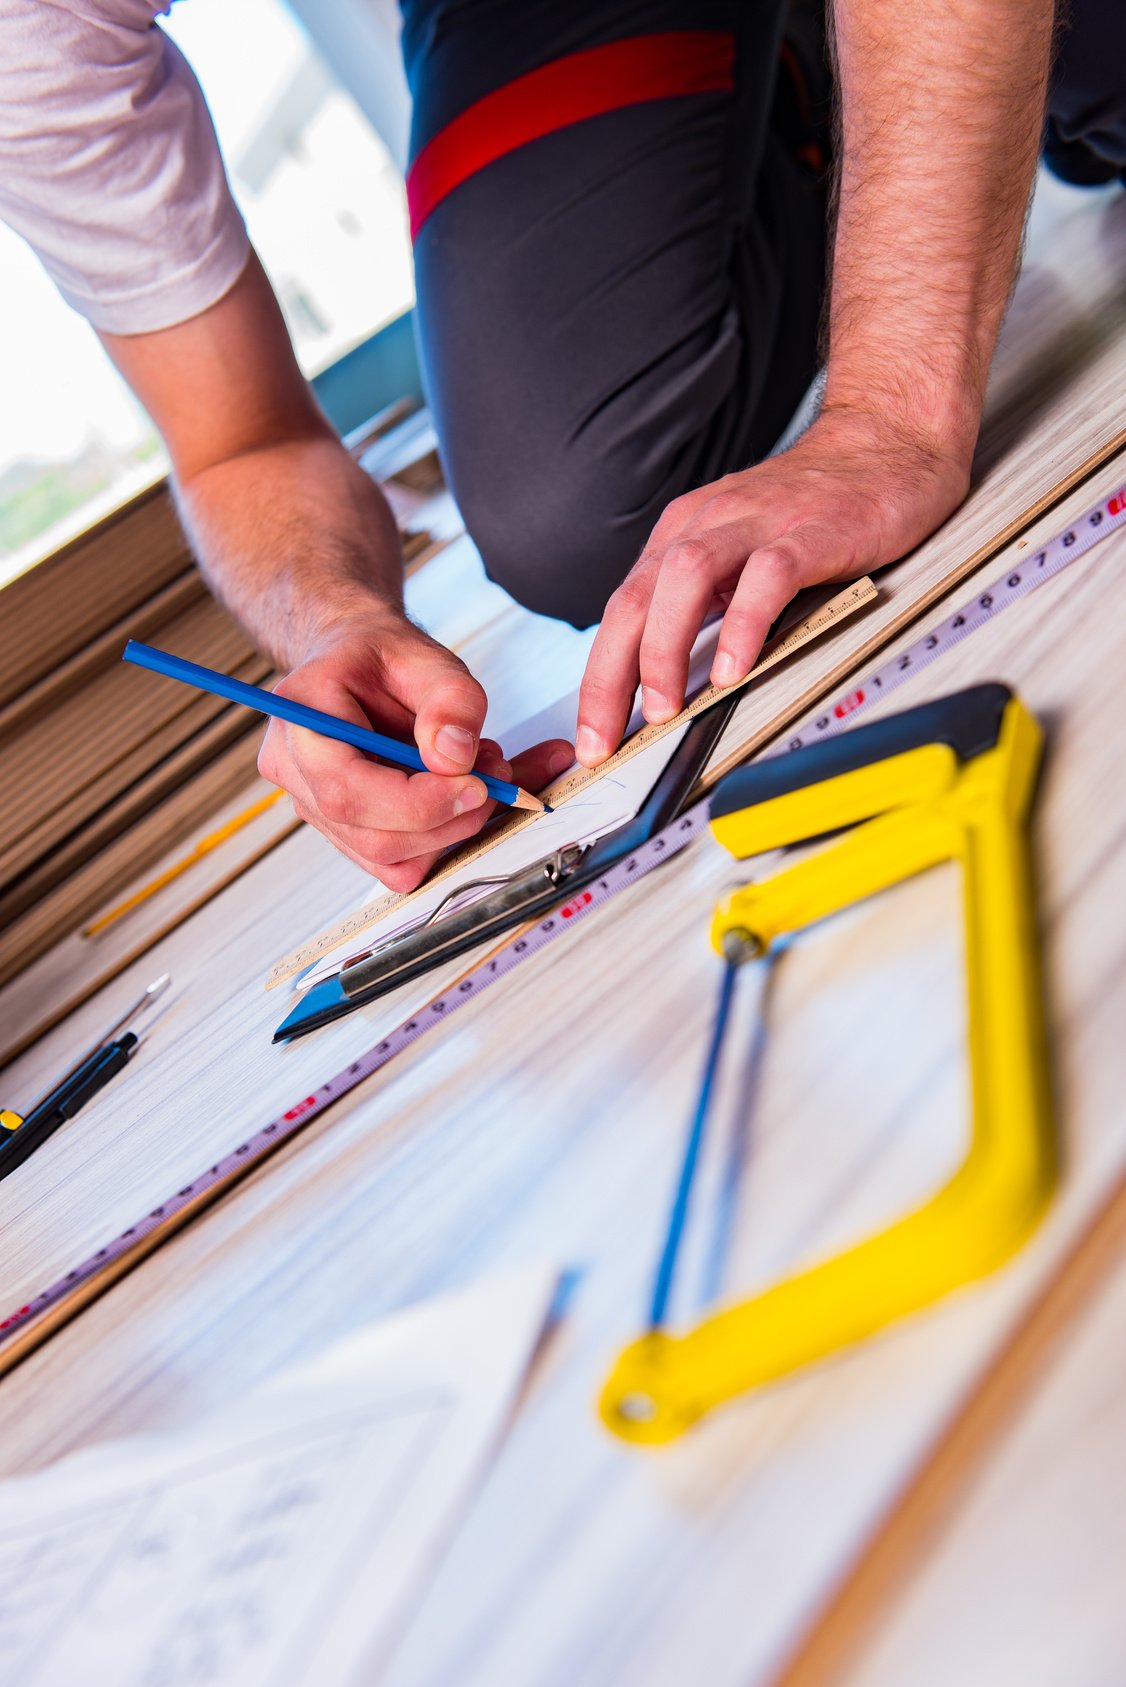 The services offered by The Carpet Man for your next renovation project